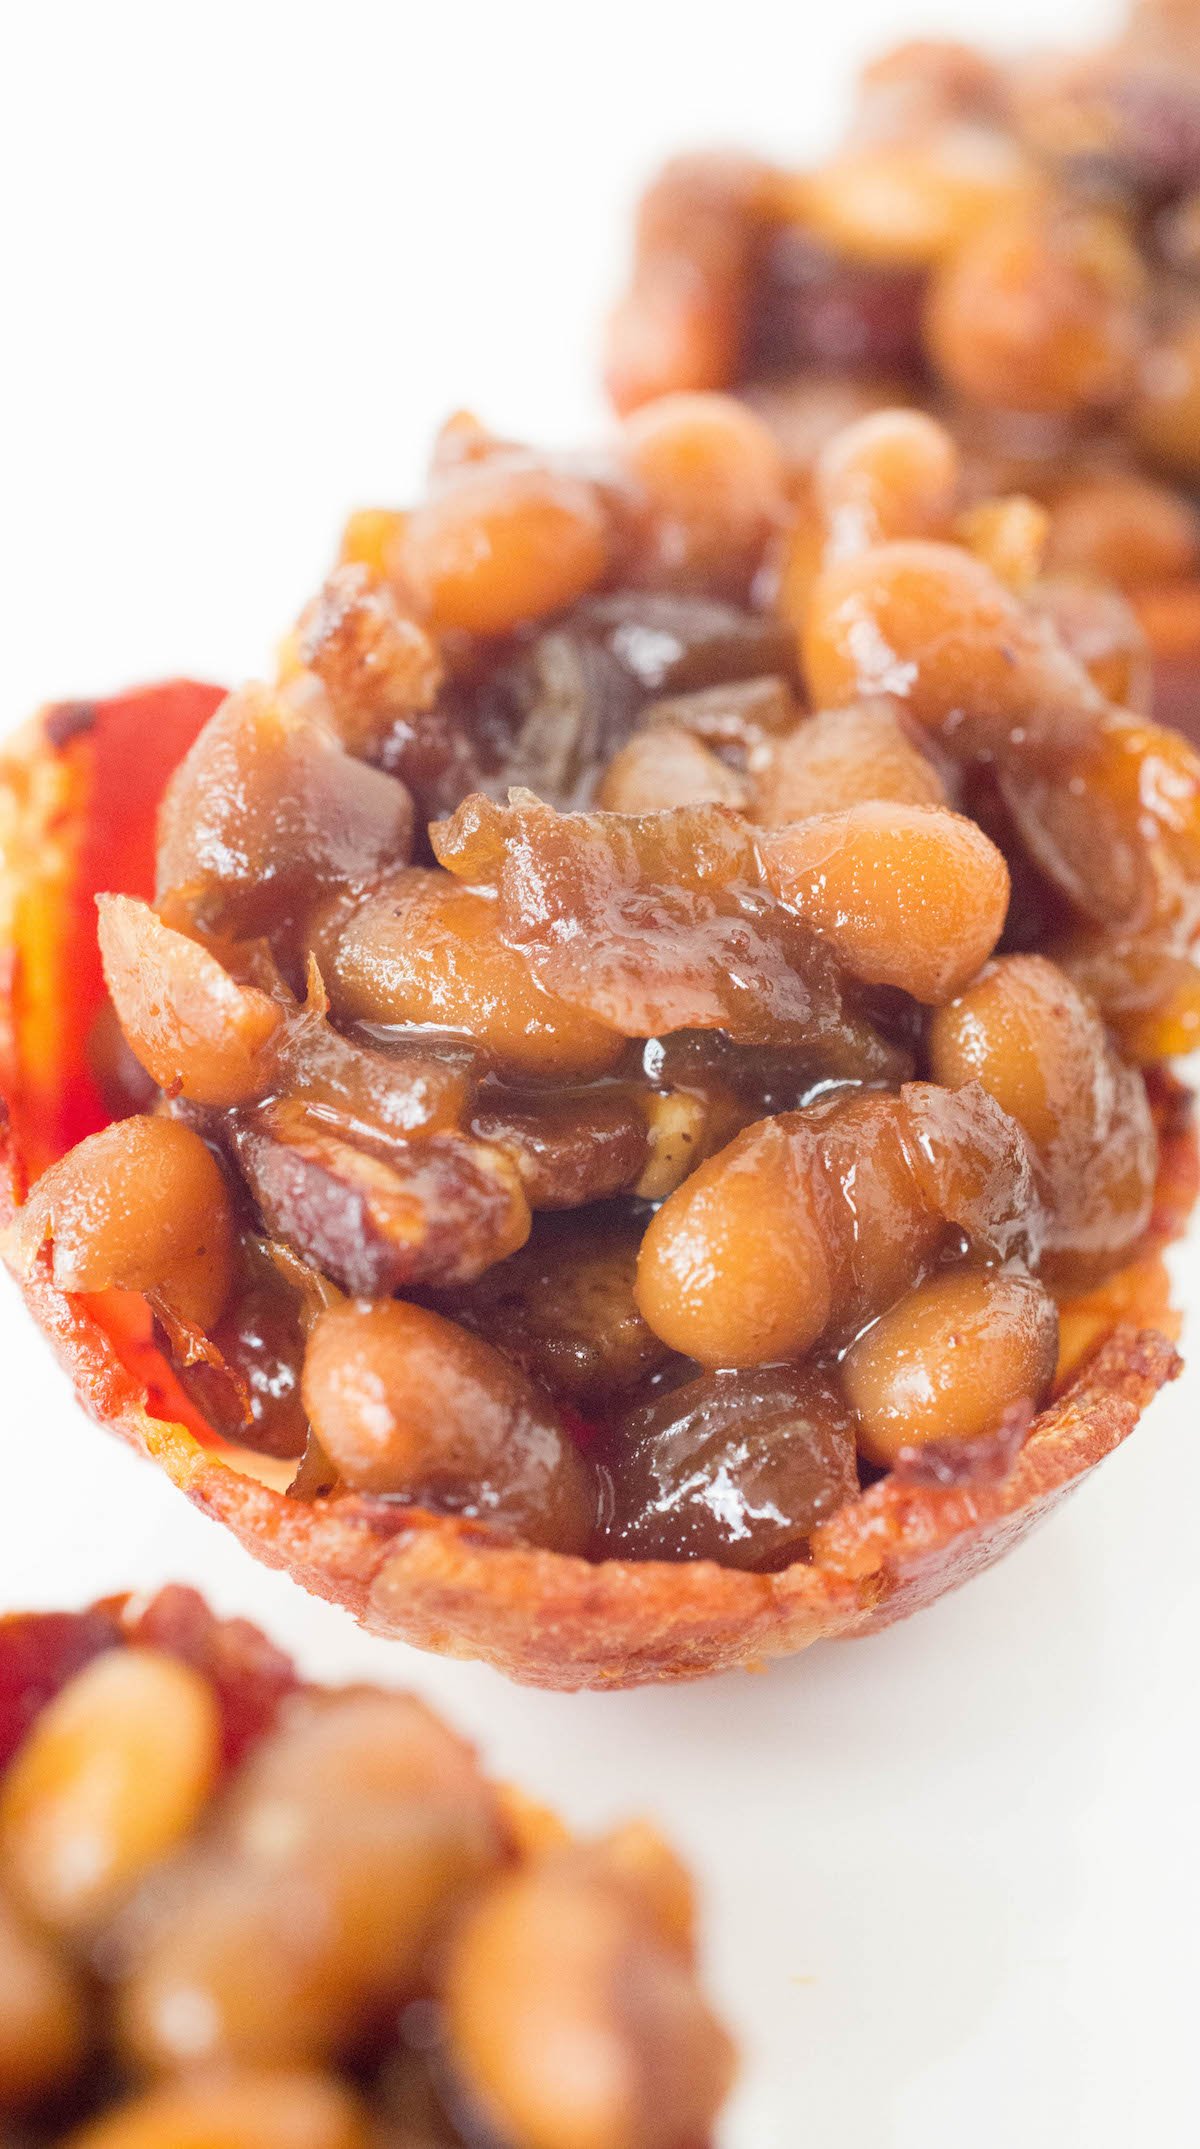 Homemade baked beans are sitting in miniature cups made out of bacon.